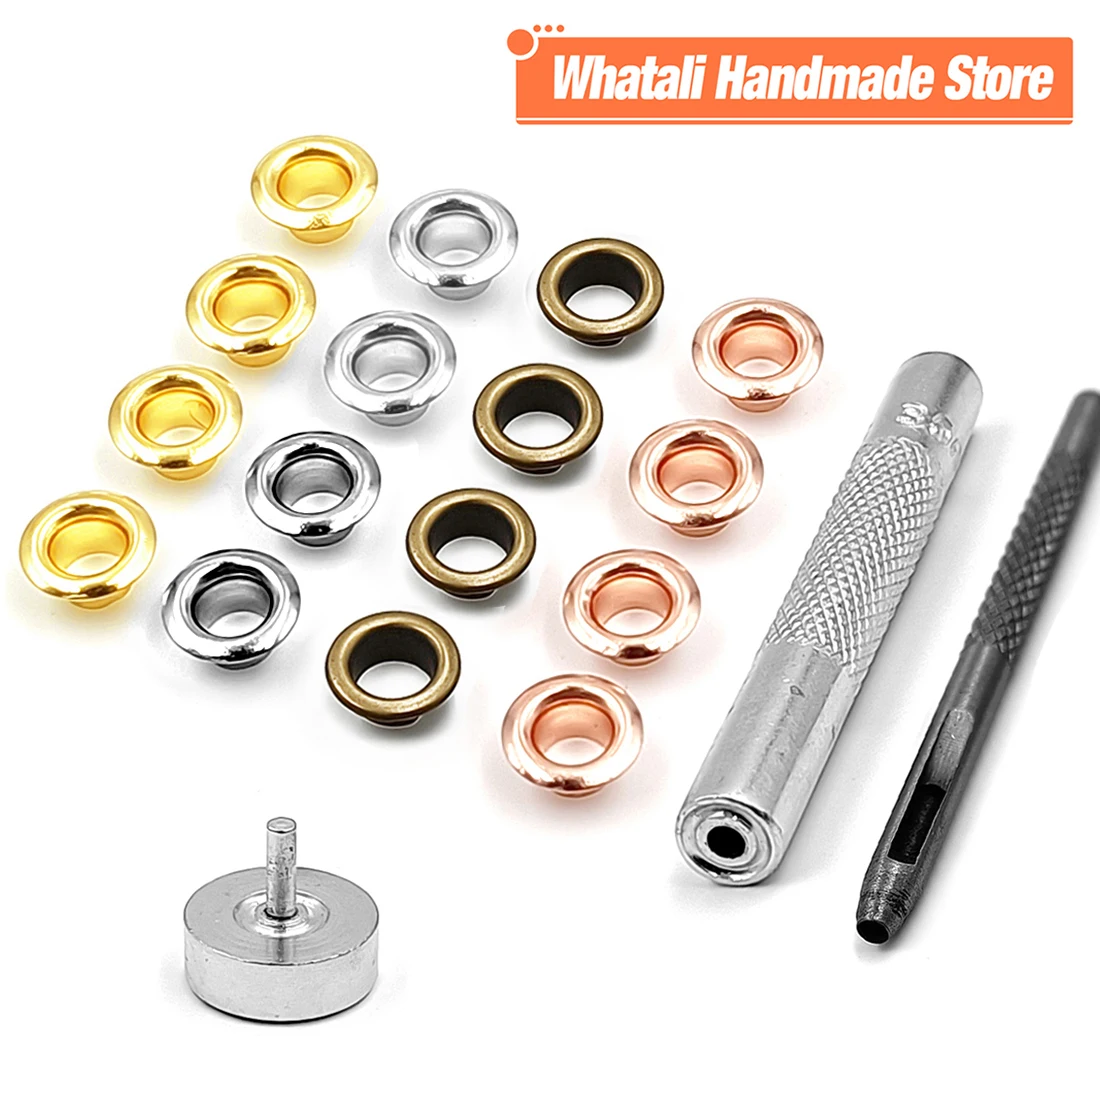 

50pcs 6mm Hole Metal Eyelets Grommets with Washer Punch Set Tool Diy Clothes Shoes Belt Cap Bag Tags Leathercraft Accessories